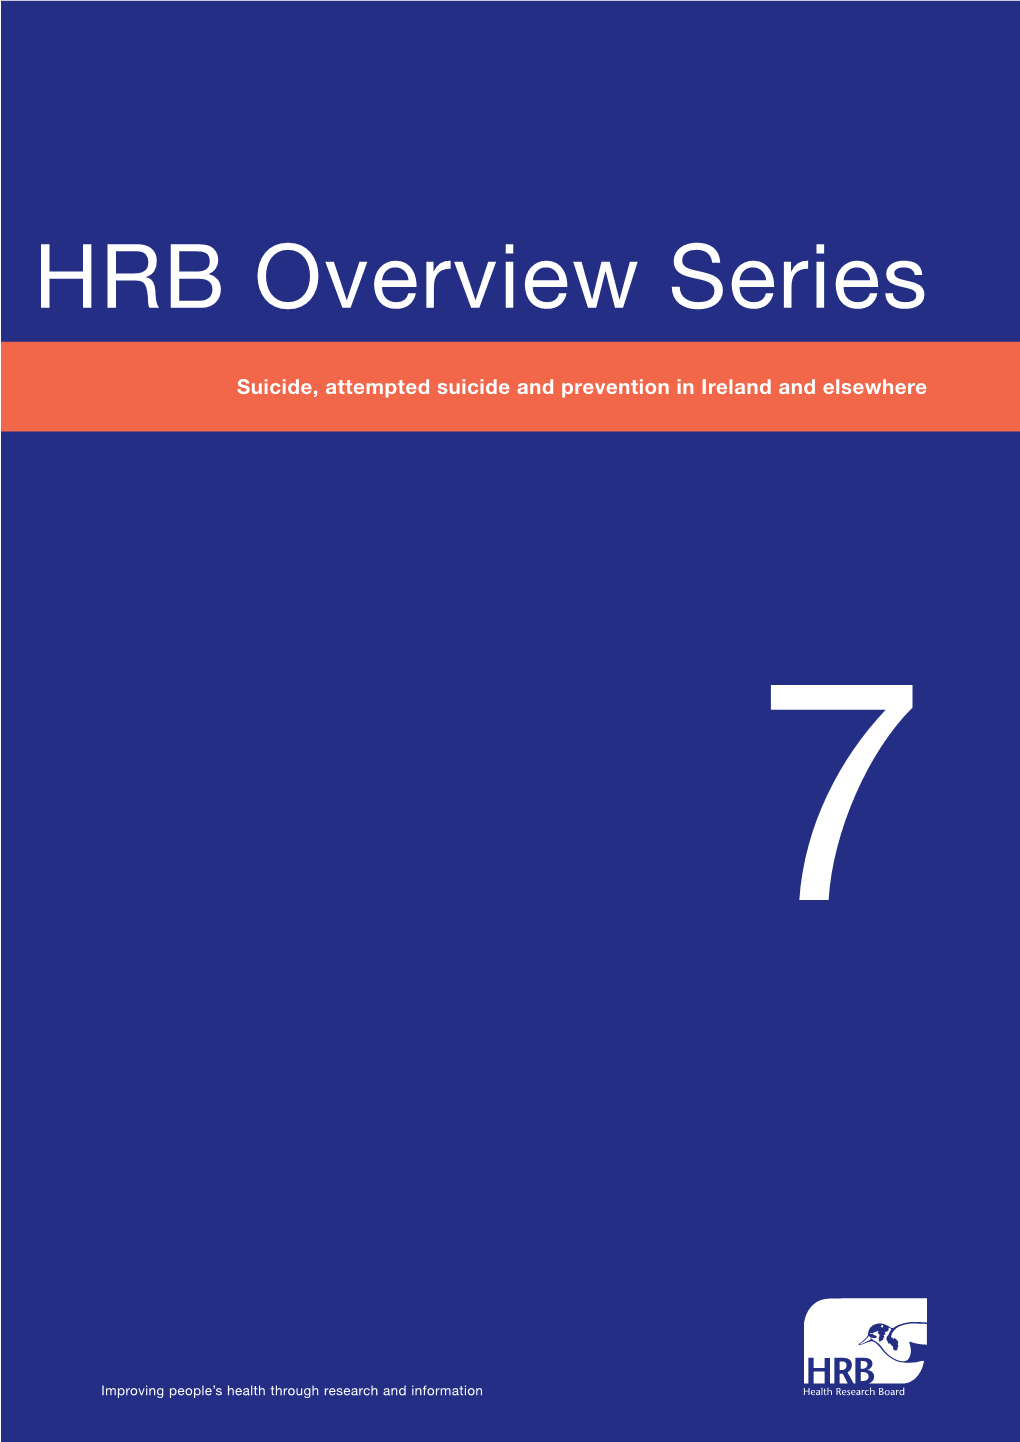 HRB Overview Series